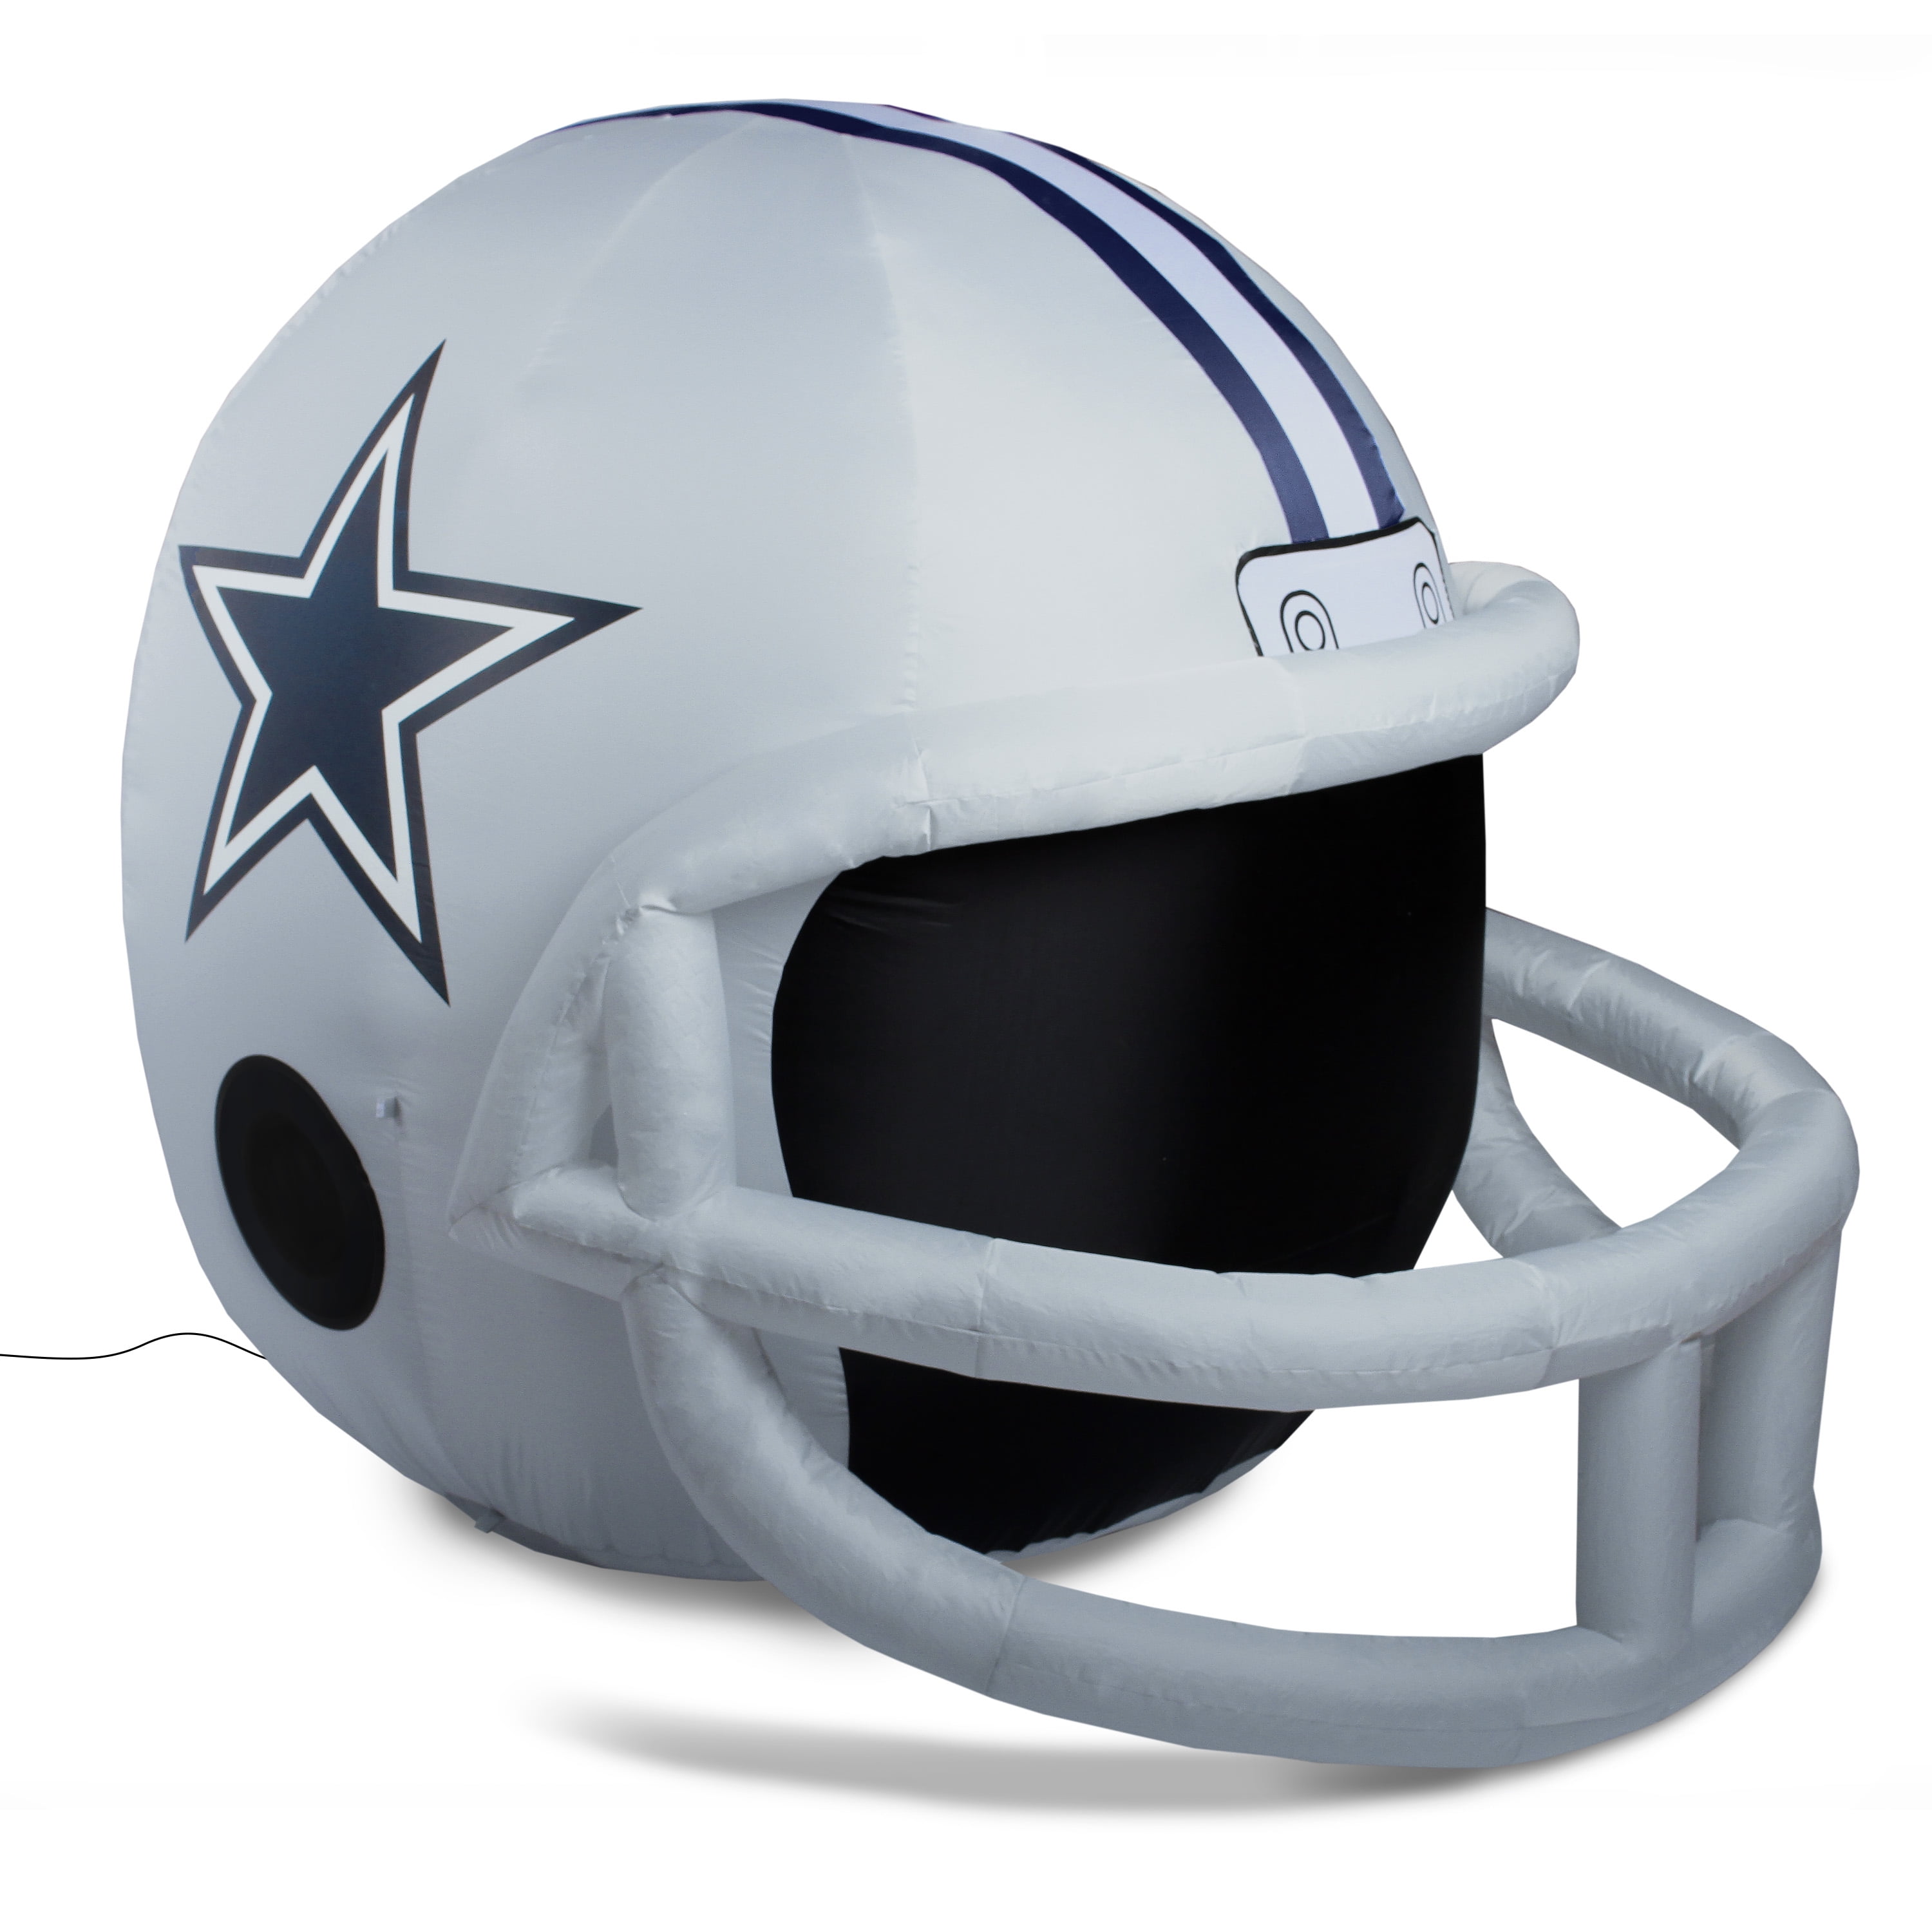 The Extra Yard: The Ins and Outs of an American Football Helmet